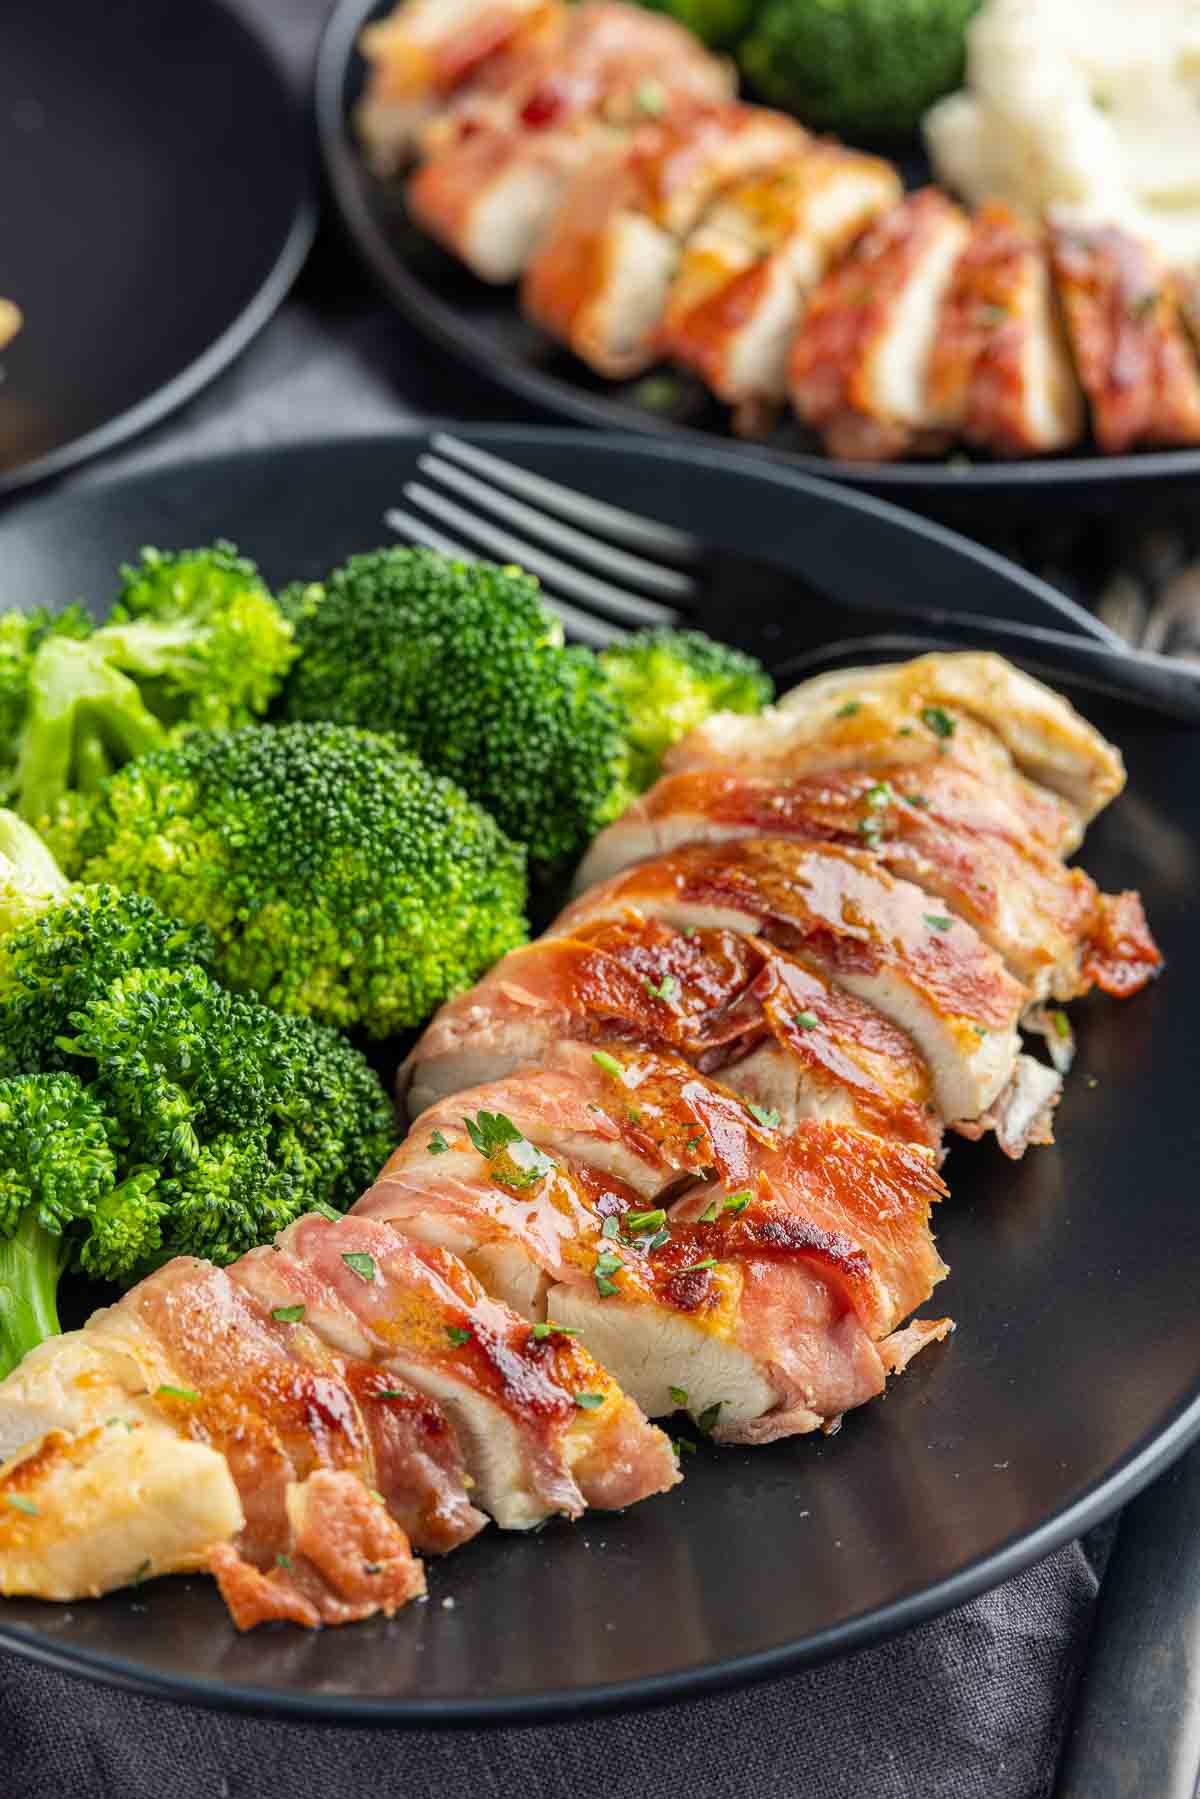 sliced up Prosciutto Wrapped Chicken on a plate with broccoli